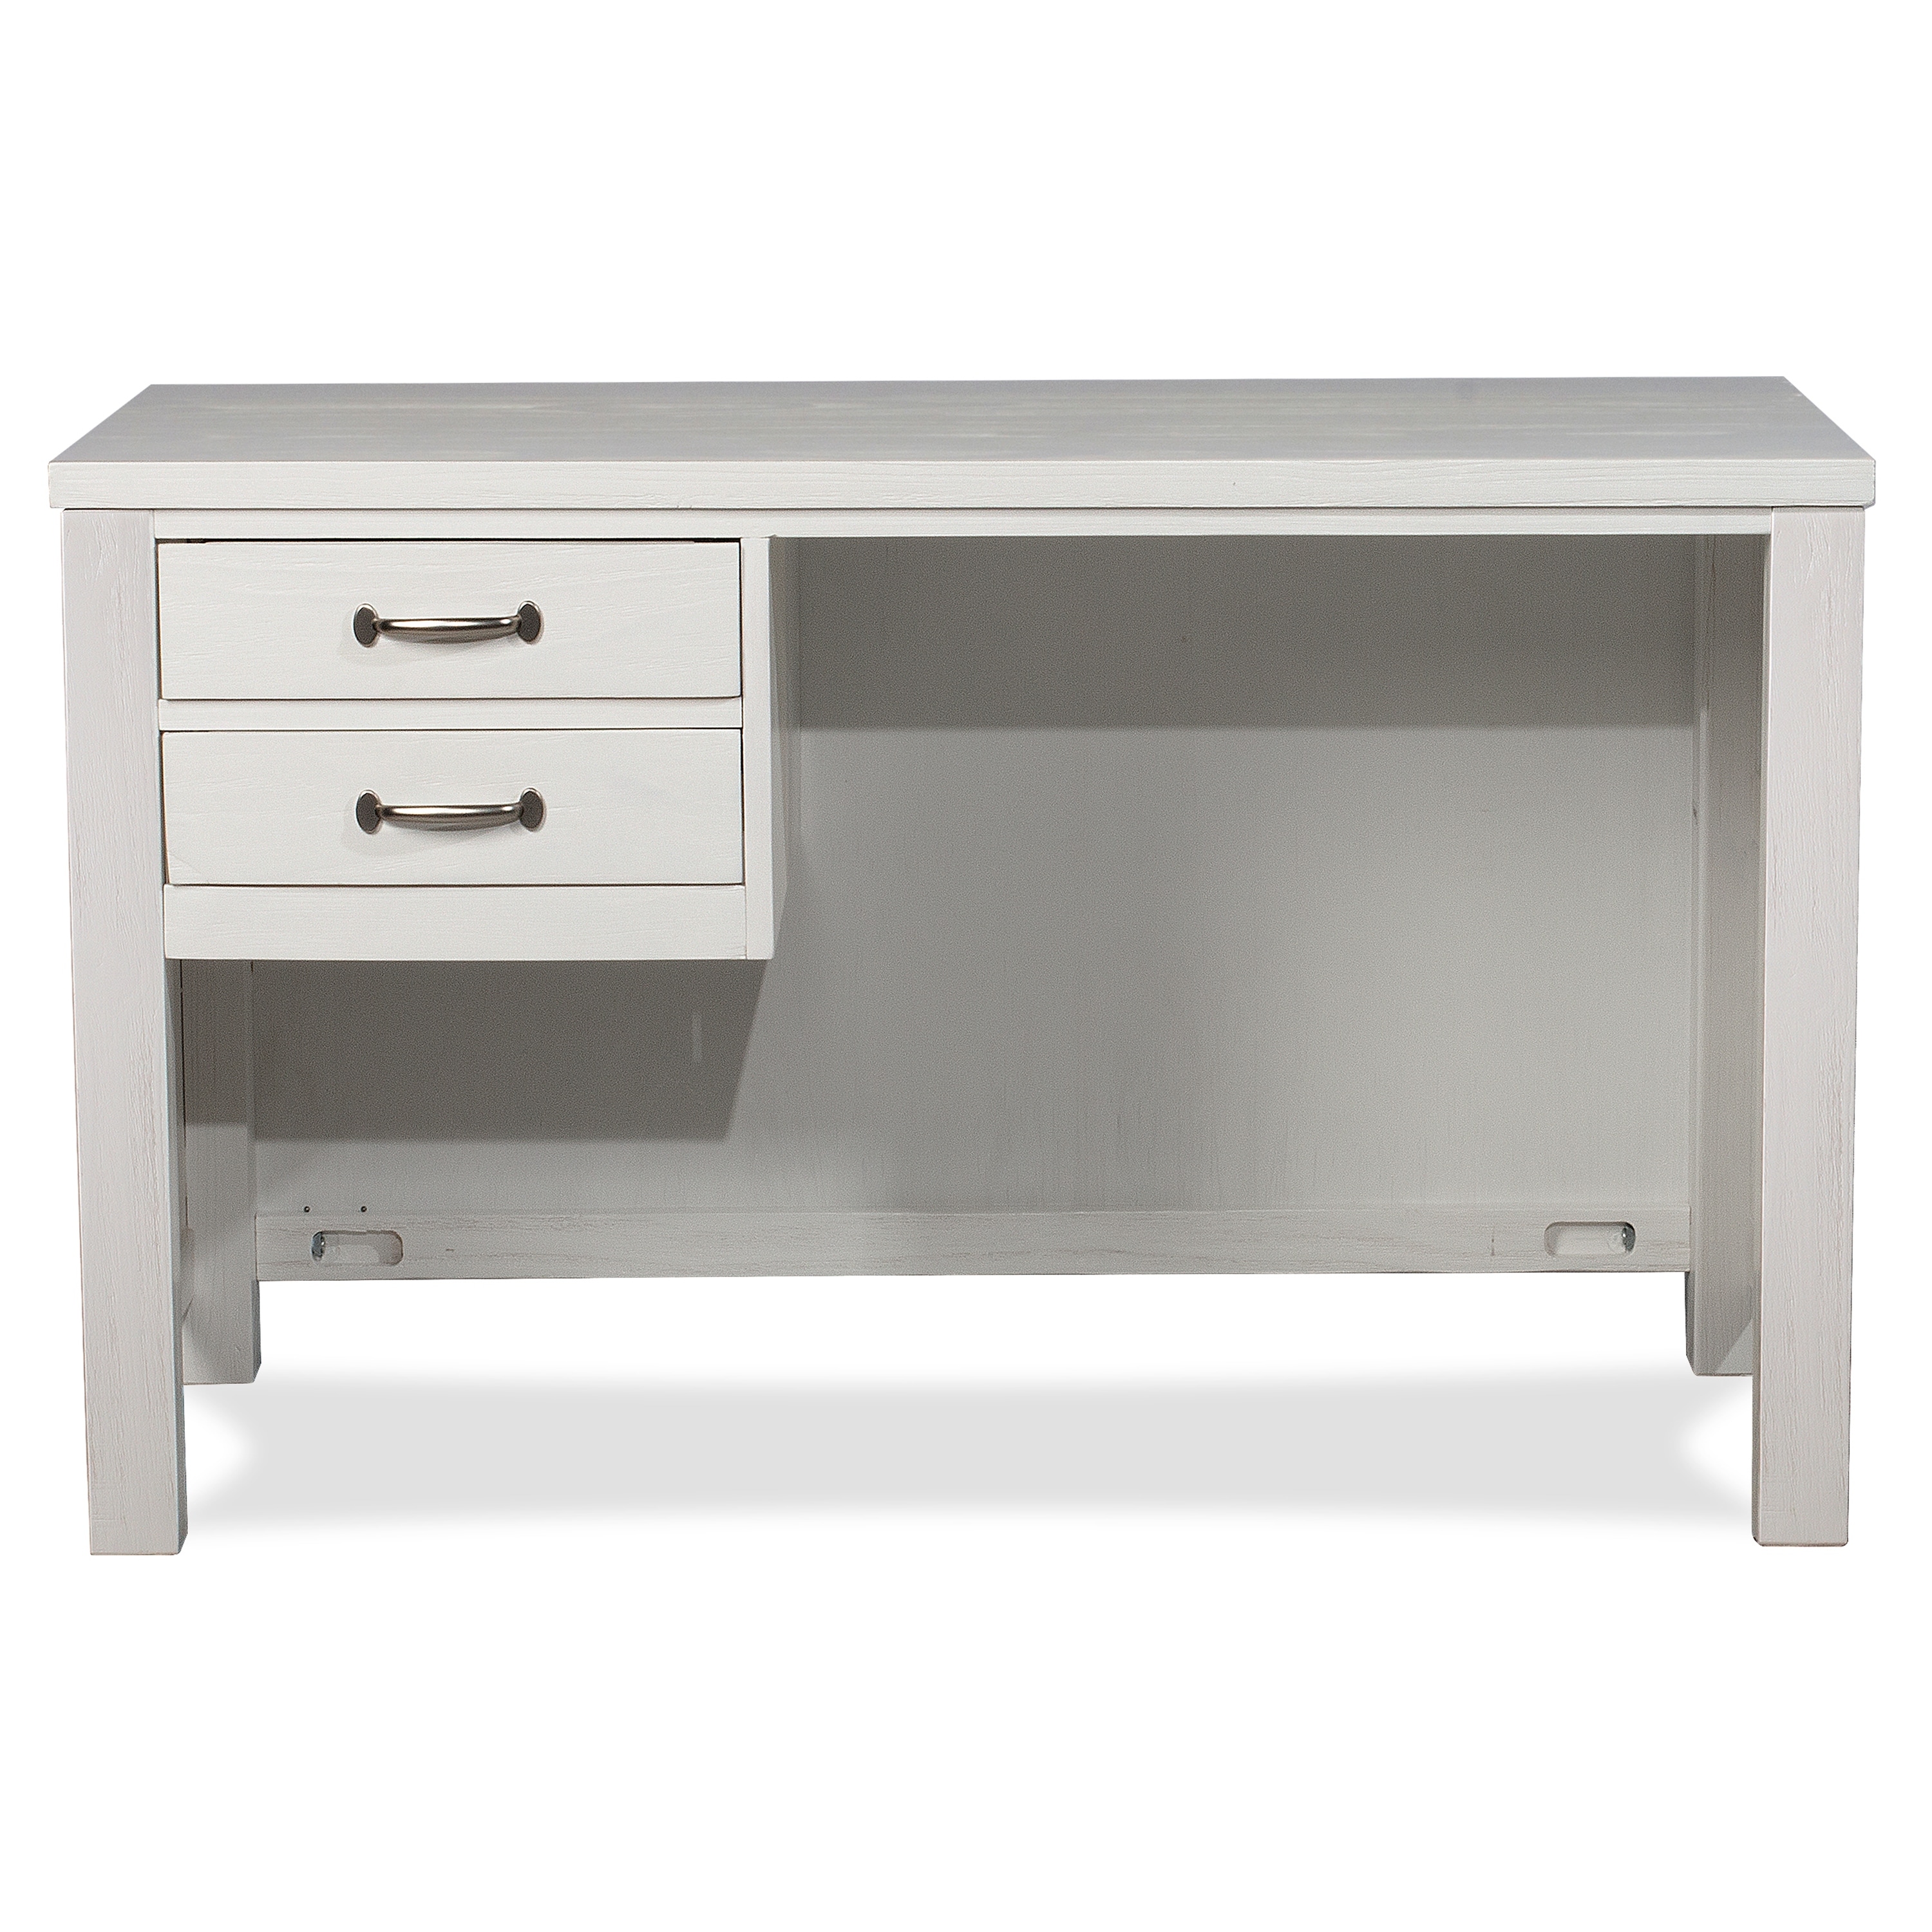 https://ak1.ostkcdn.com/images/products/is/images/direct/403cfb229784ff0912bb58a24c30aca1f9ac5e77/Hillsdale-Kids-and-Teen-Highlands-Wood-Desk-with-Hutch%2C-White.jpg